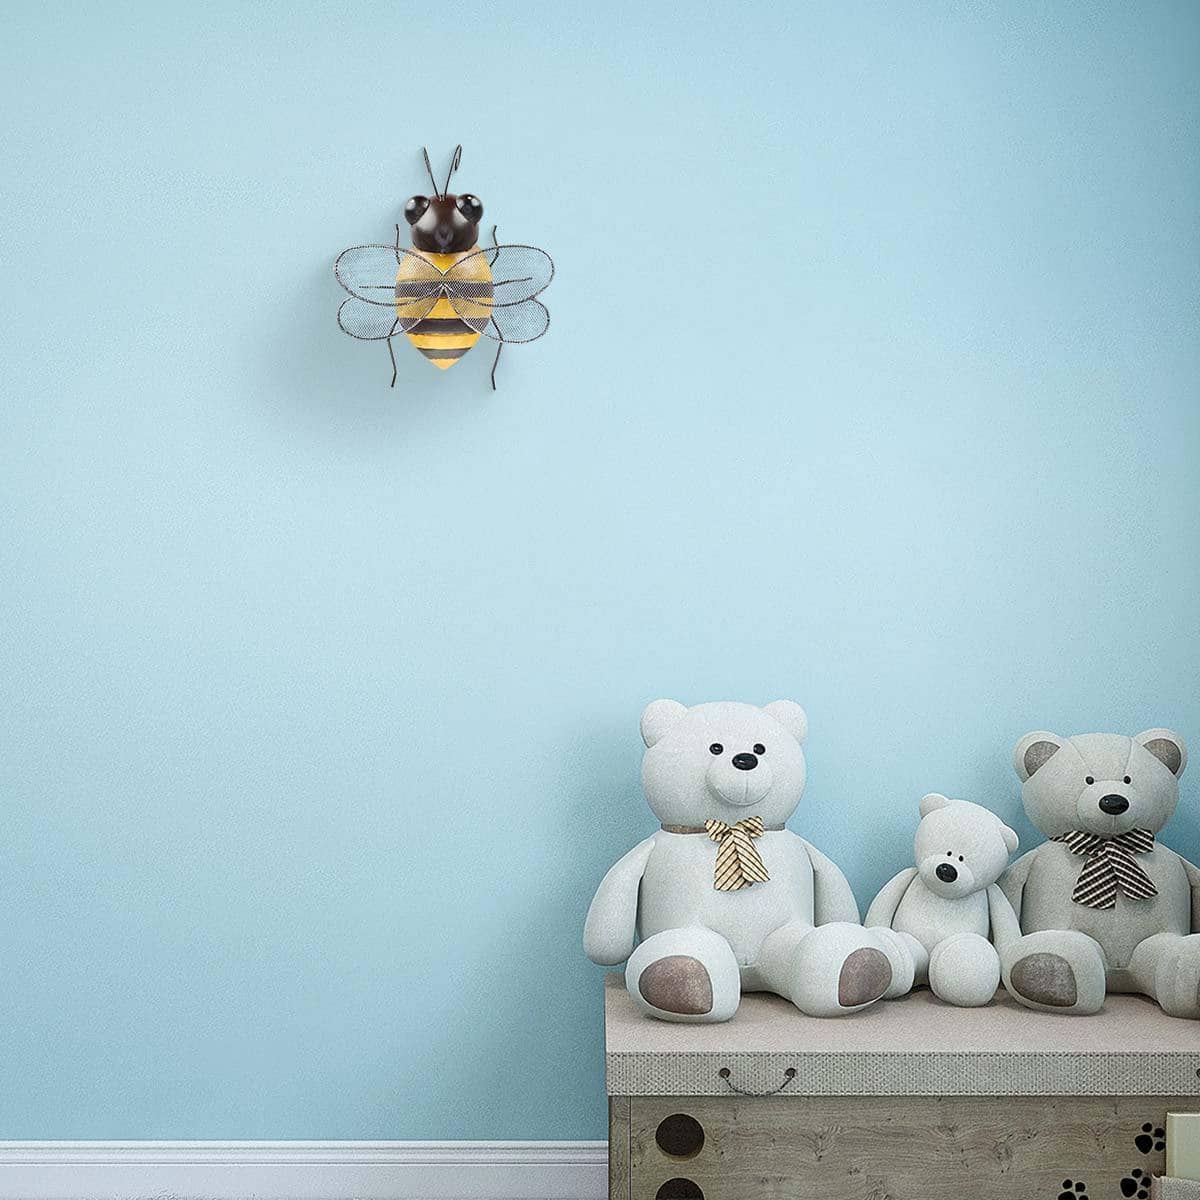 Buzzing Bee Iron Decoration - Handcrafted with Eco-Friendly Finish